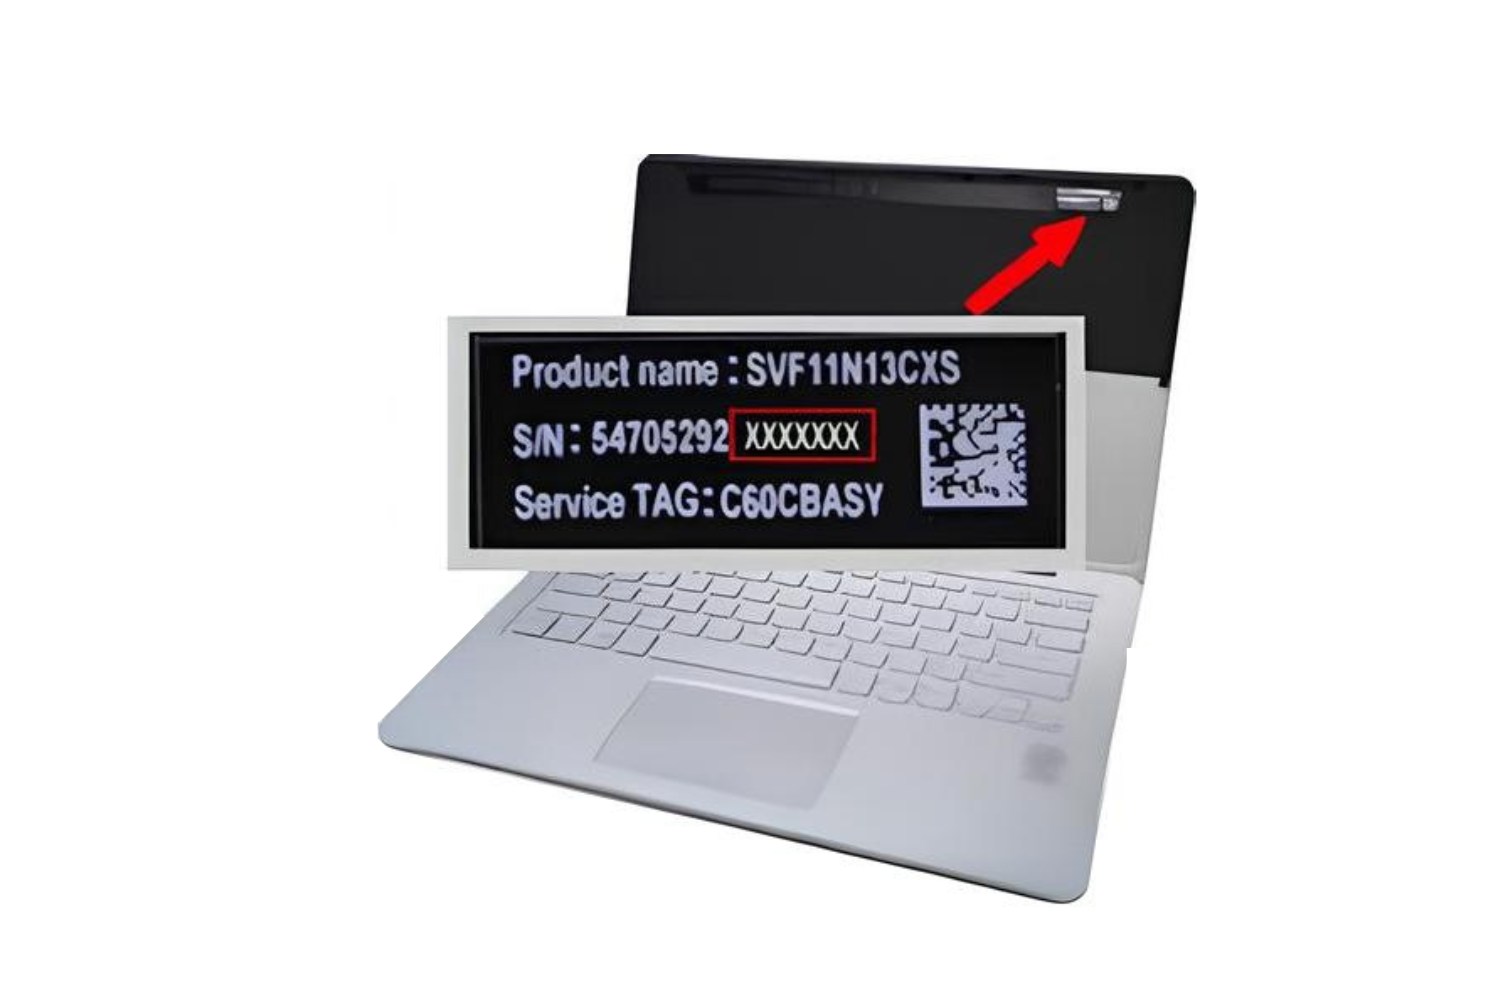 where-to-find-sony-ultrabook-model-number